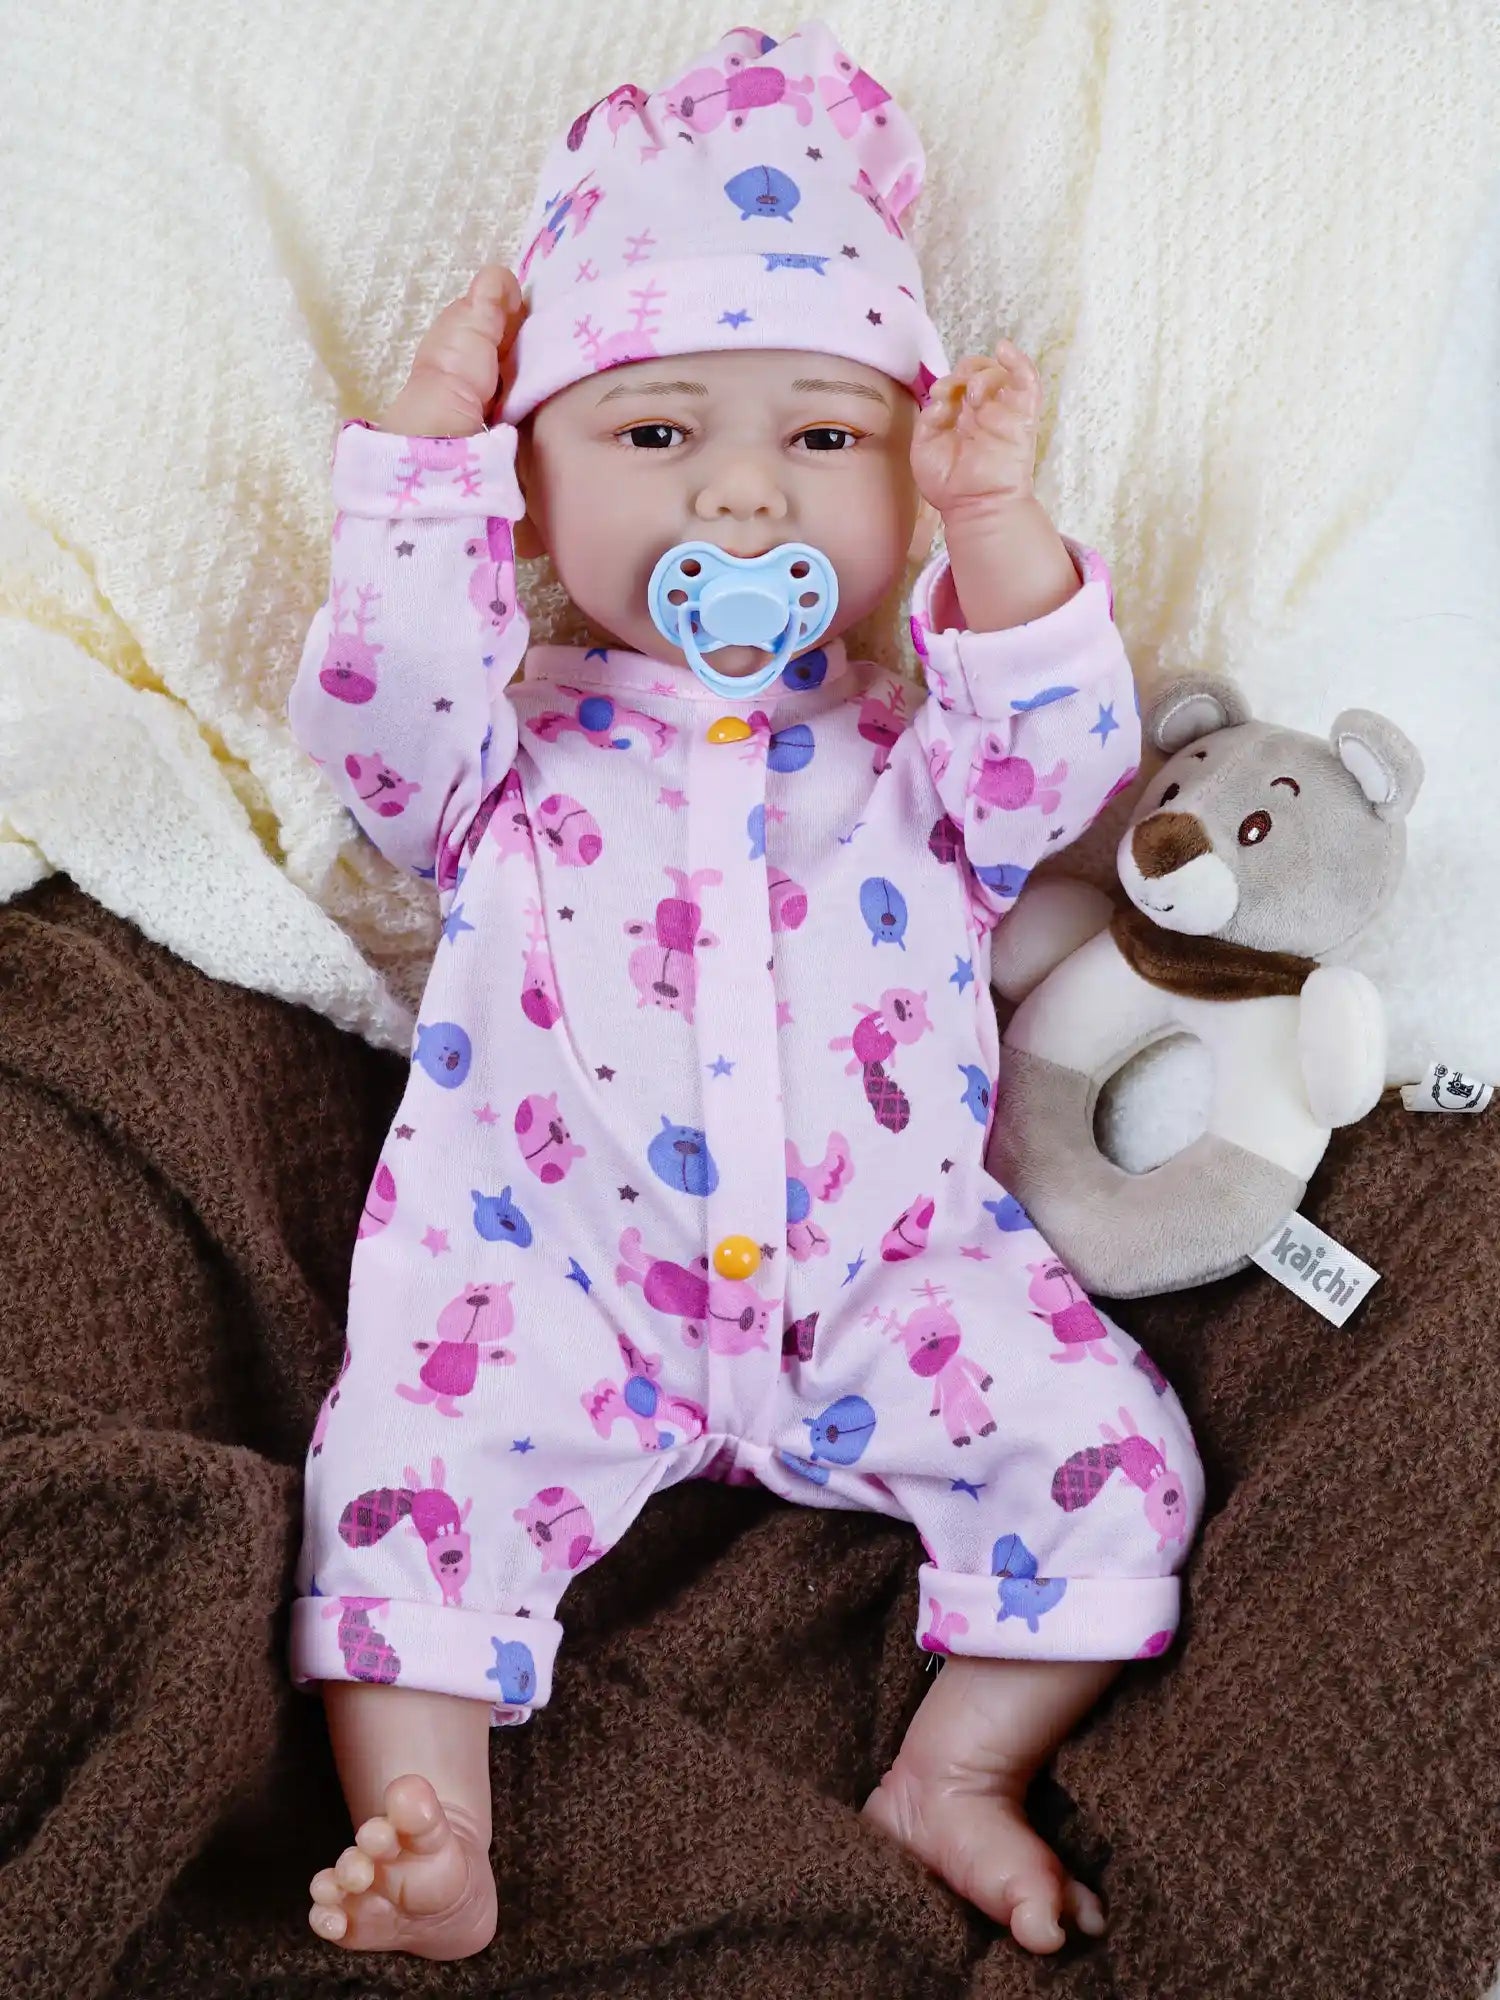 Smiling reborn baby doll in pink sea-themed pajamas seated with plush bear toys, on a cream blanket beside a brown blanket